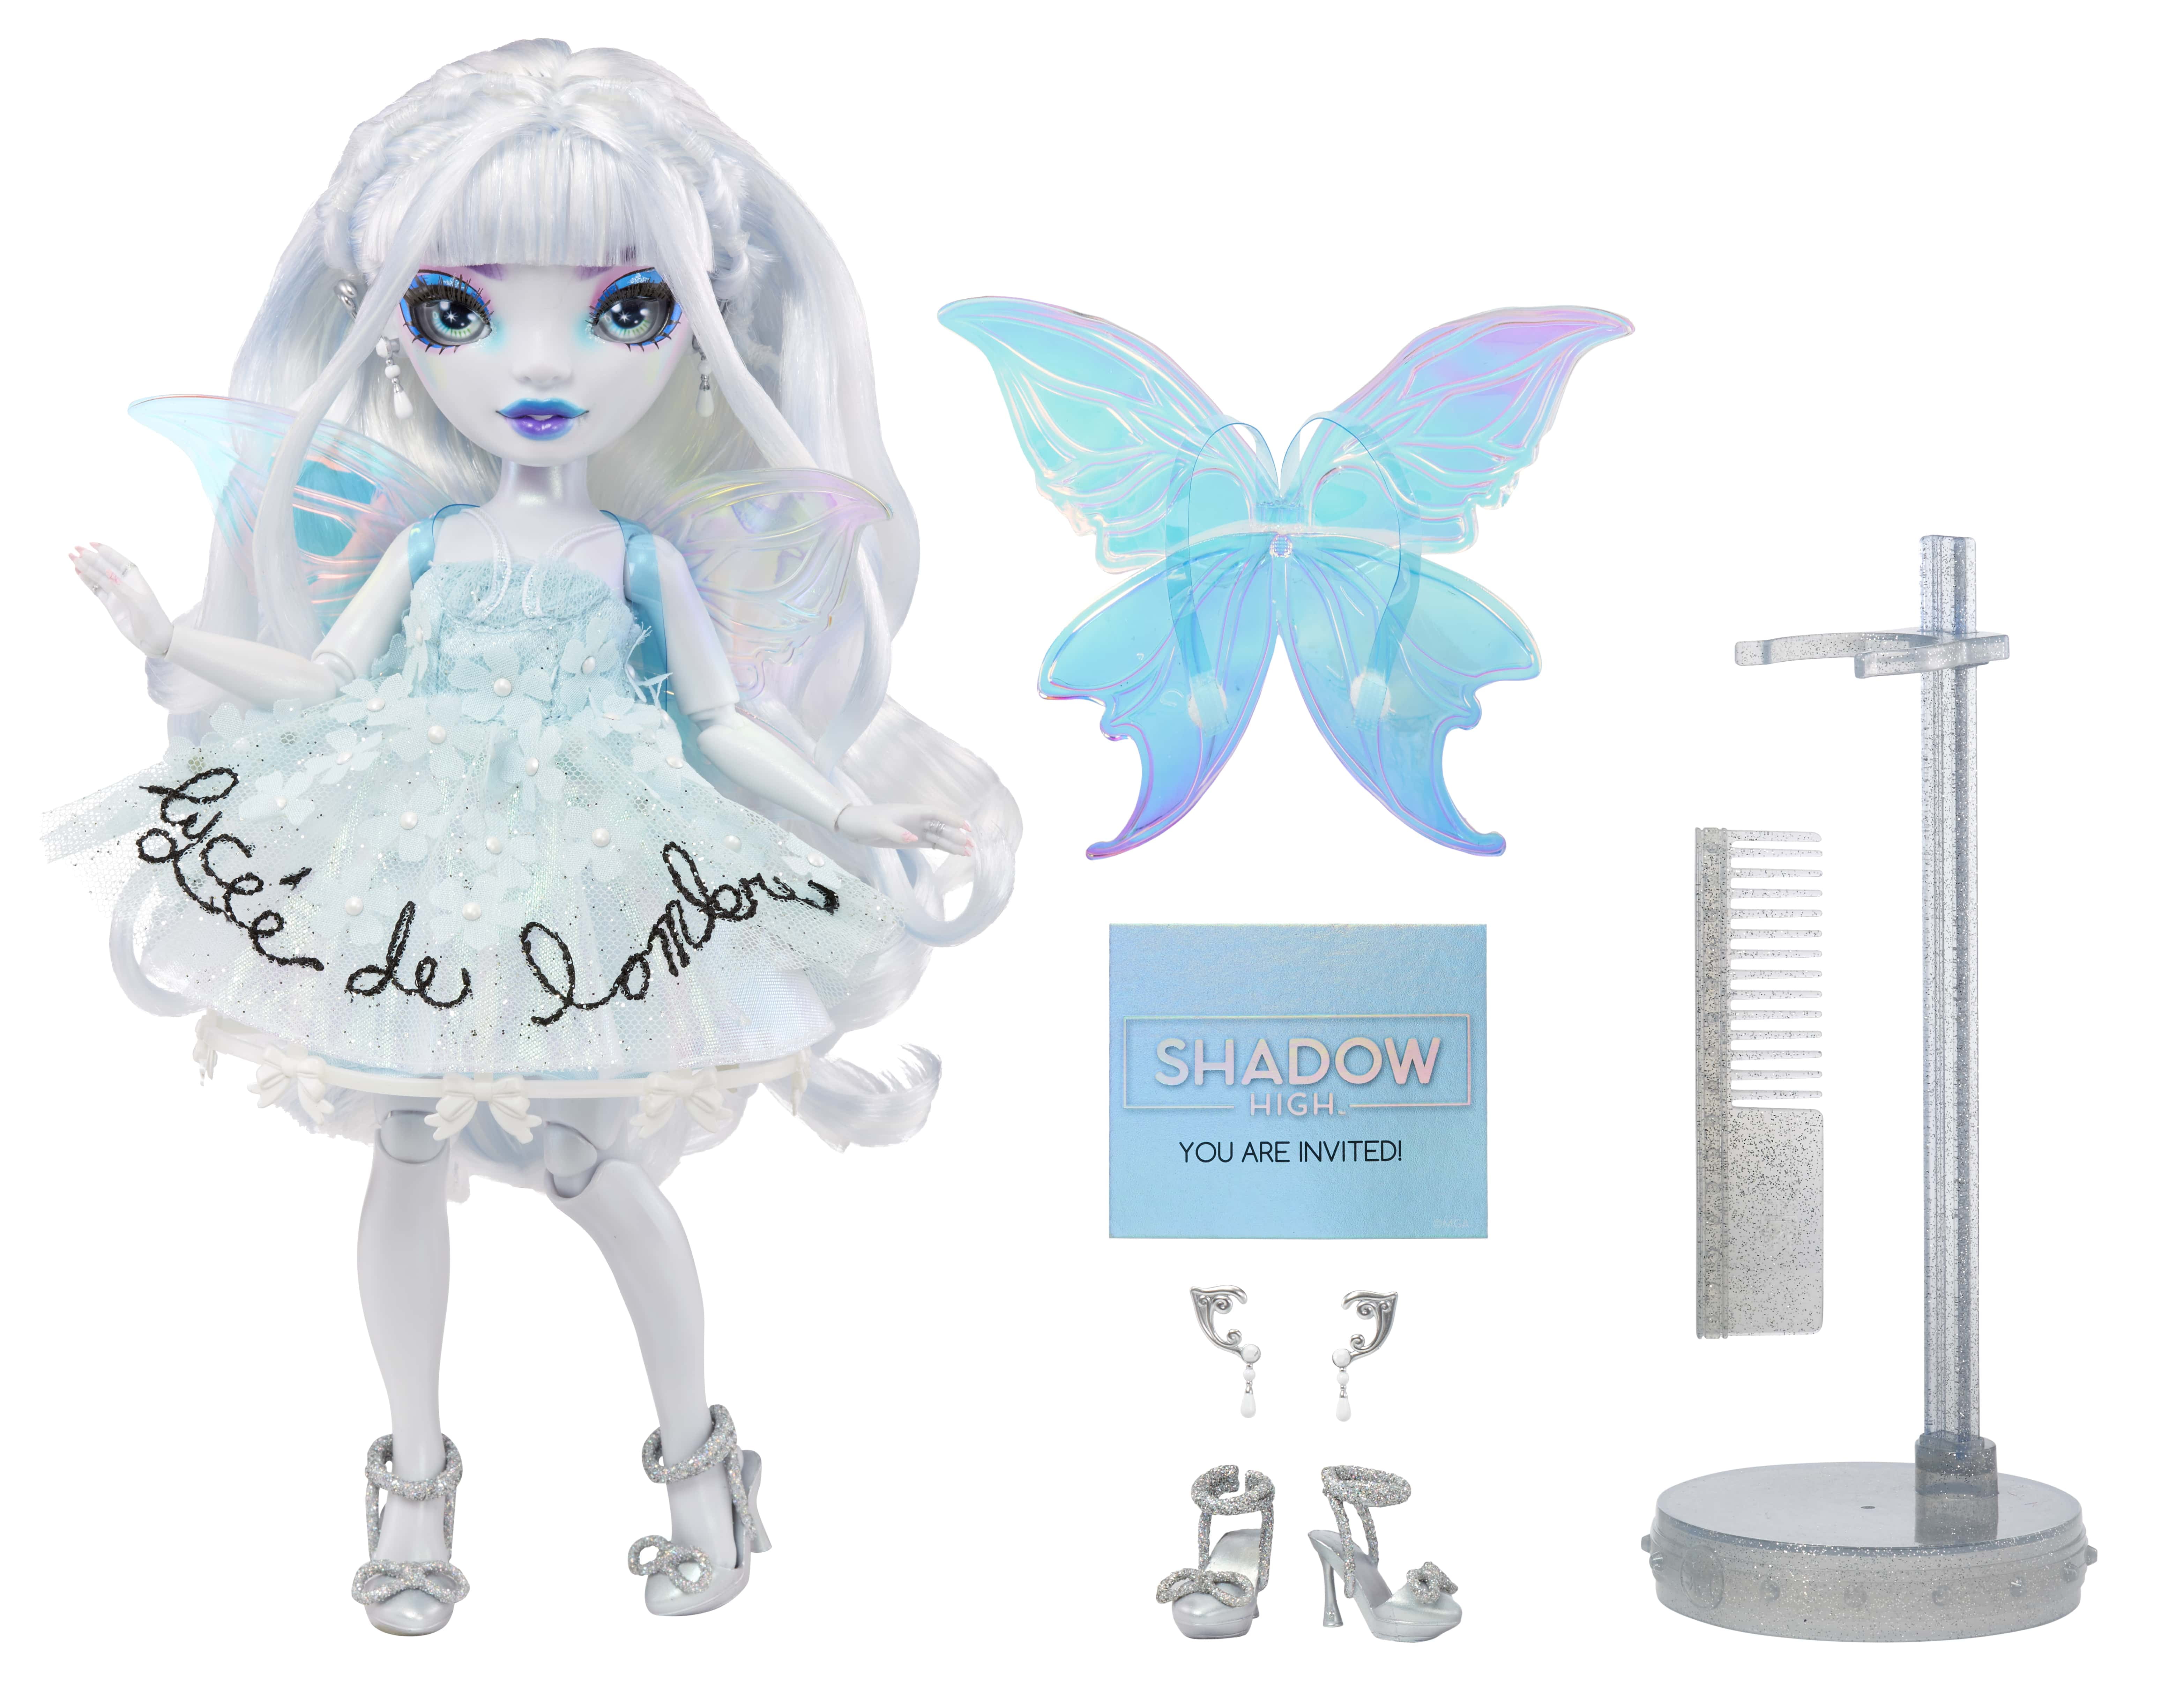 Rainbow Vision COSTUME BALL Shadow High – Eliza McFee (Light Blue) Fashion Doll. 11 inch Fairy Themed Costume and Accessories. Great Gift for Kids 6-12 Years Old & Collectors - Walmart.com